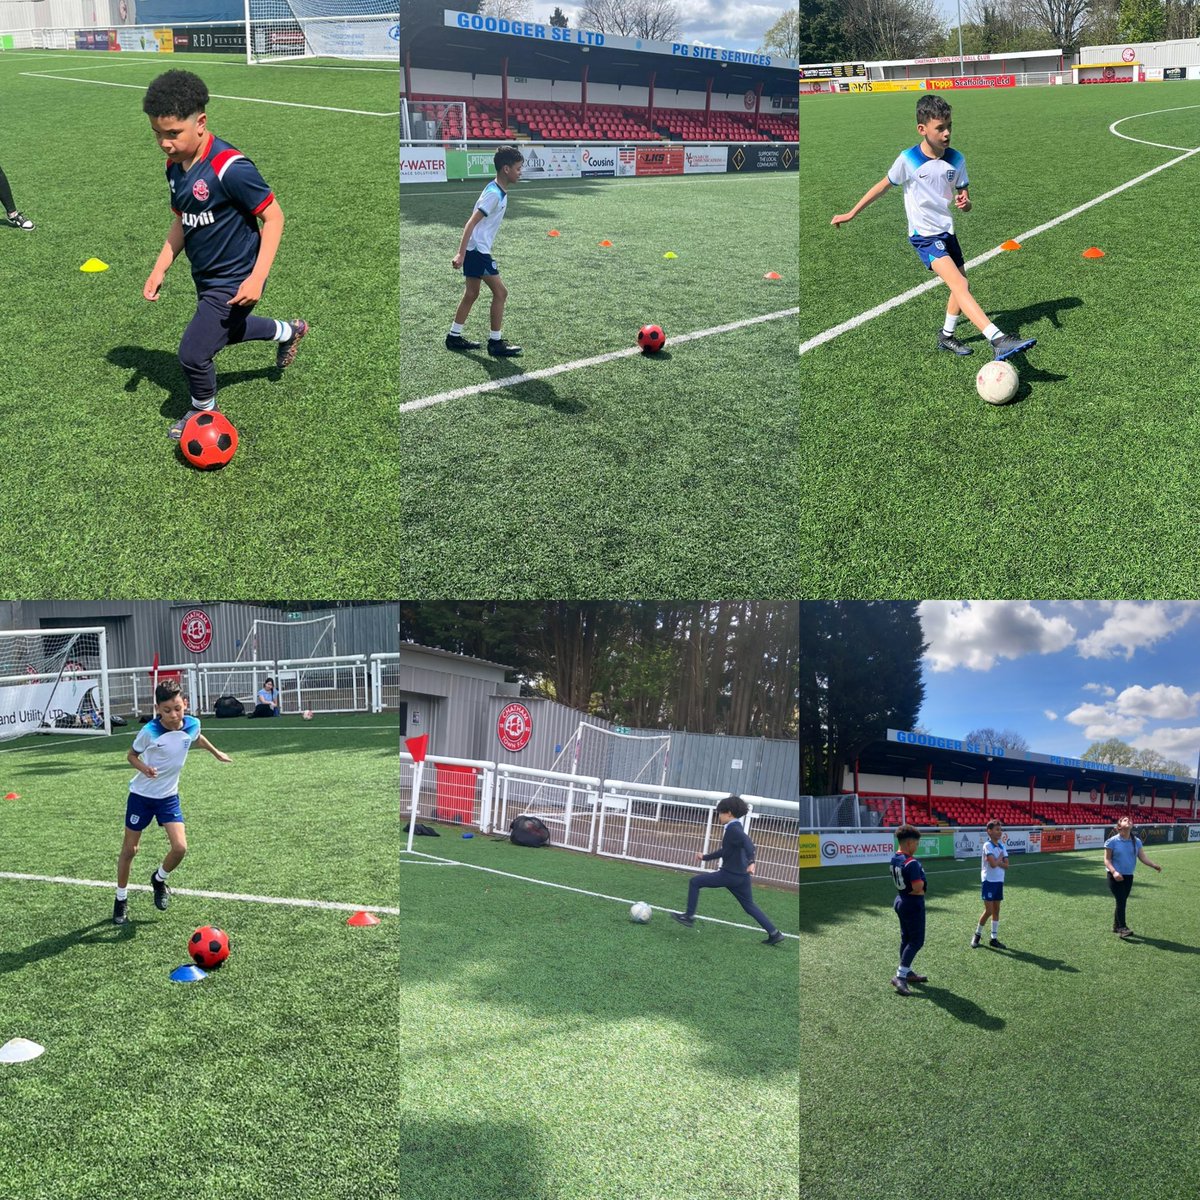 Thank you to @ChathamTownFC, who have allowed us to use their football pitch,so the children are able to enjoy a PE lesson.All children enjoyed learning new skills and some were even keen to enjoy a penalty shoot out against our lead teacher Mr May! #ThisisAP #PE #chathamtownFC